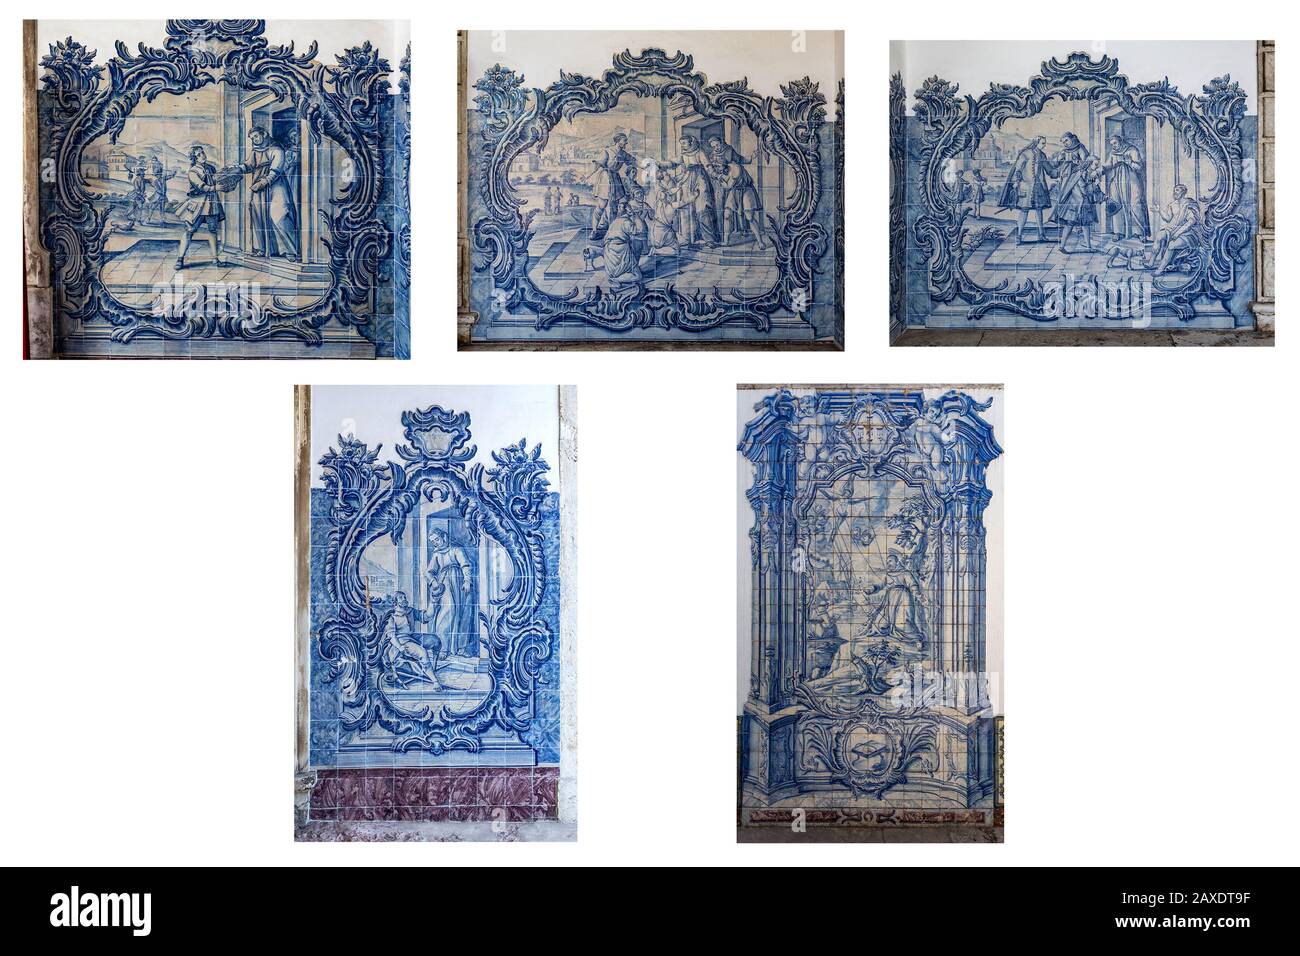 Detail of some tiles panels of the Convent of Sao Pedro de Alcantara depicting the Franciscan monastic charity of the 18th century, in Lisbon, Portuga Stock Photo